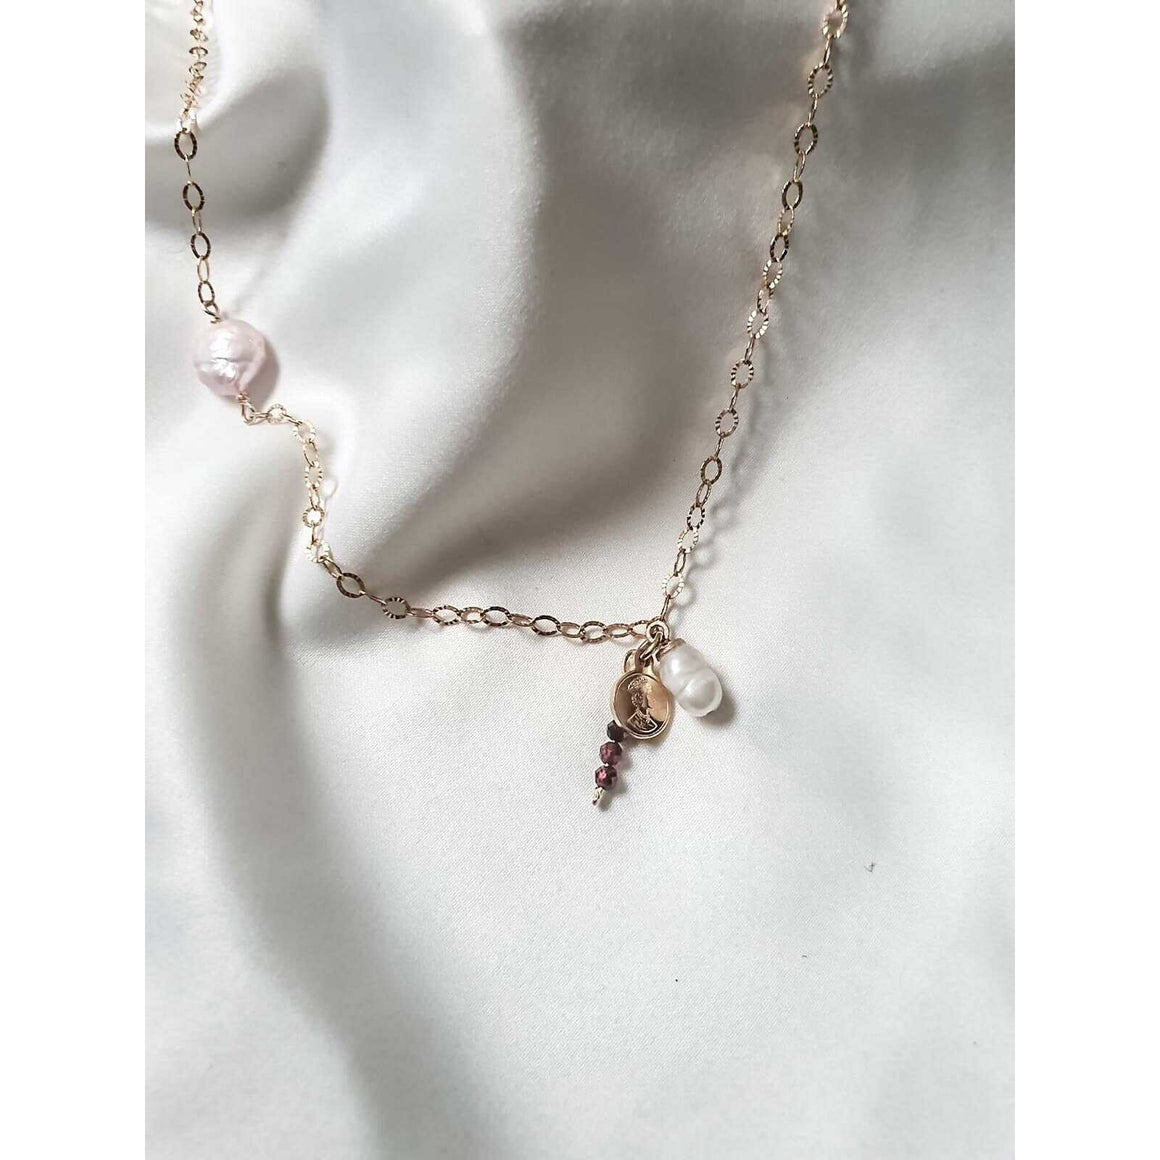 A gold necklace with a pink pearl, a pendant of white pearl and a garnet